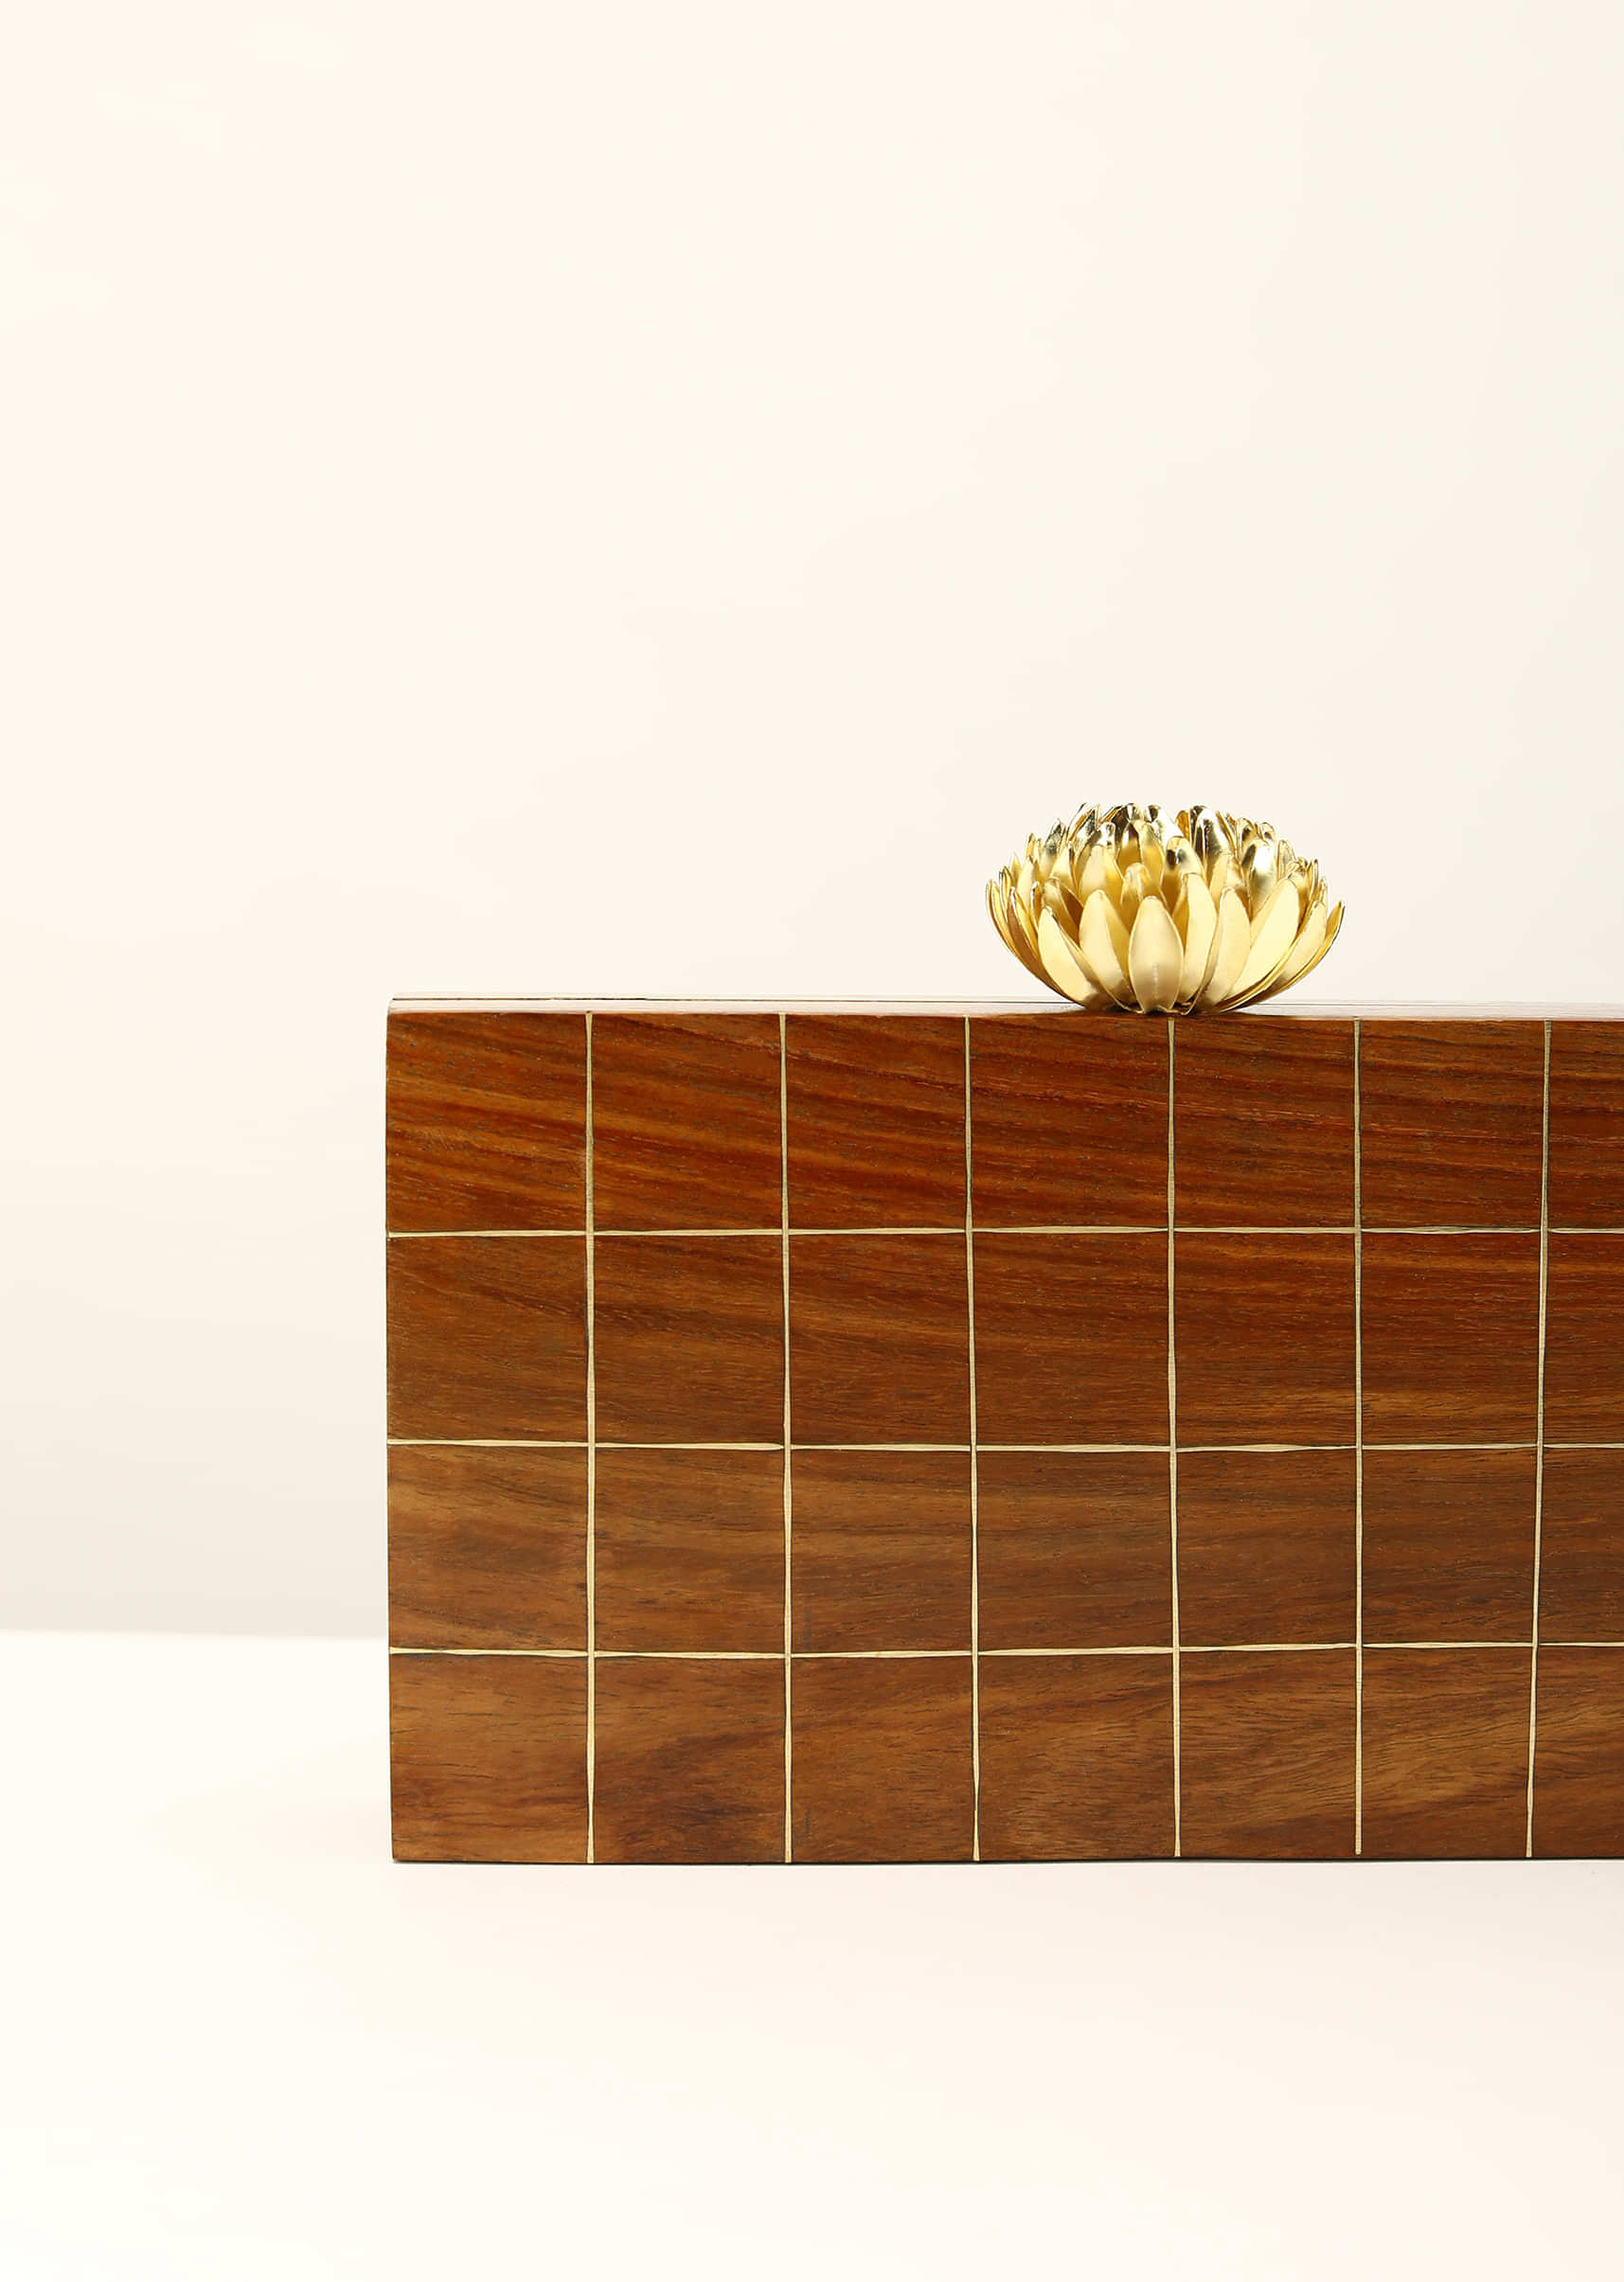 Brown Wood Box Clutch With Golden Flower Clasp And Metal Accented Checks